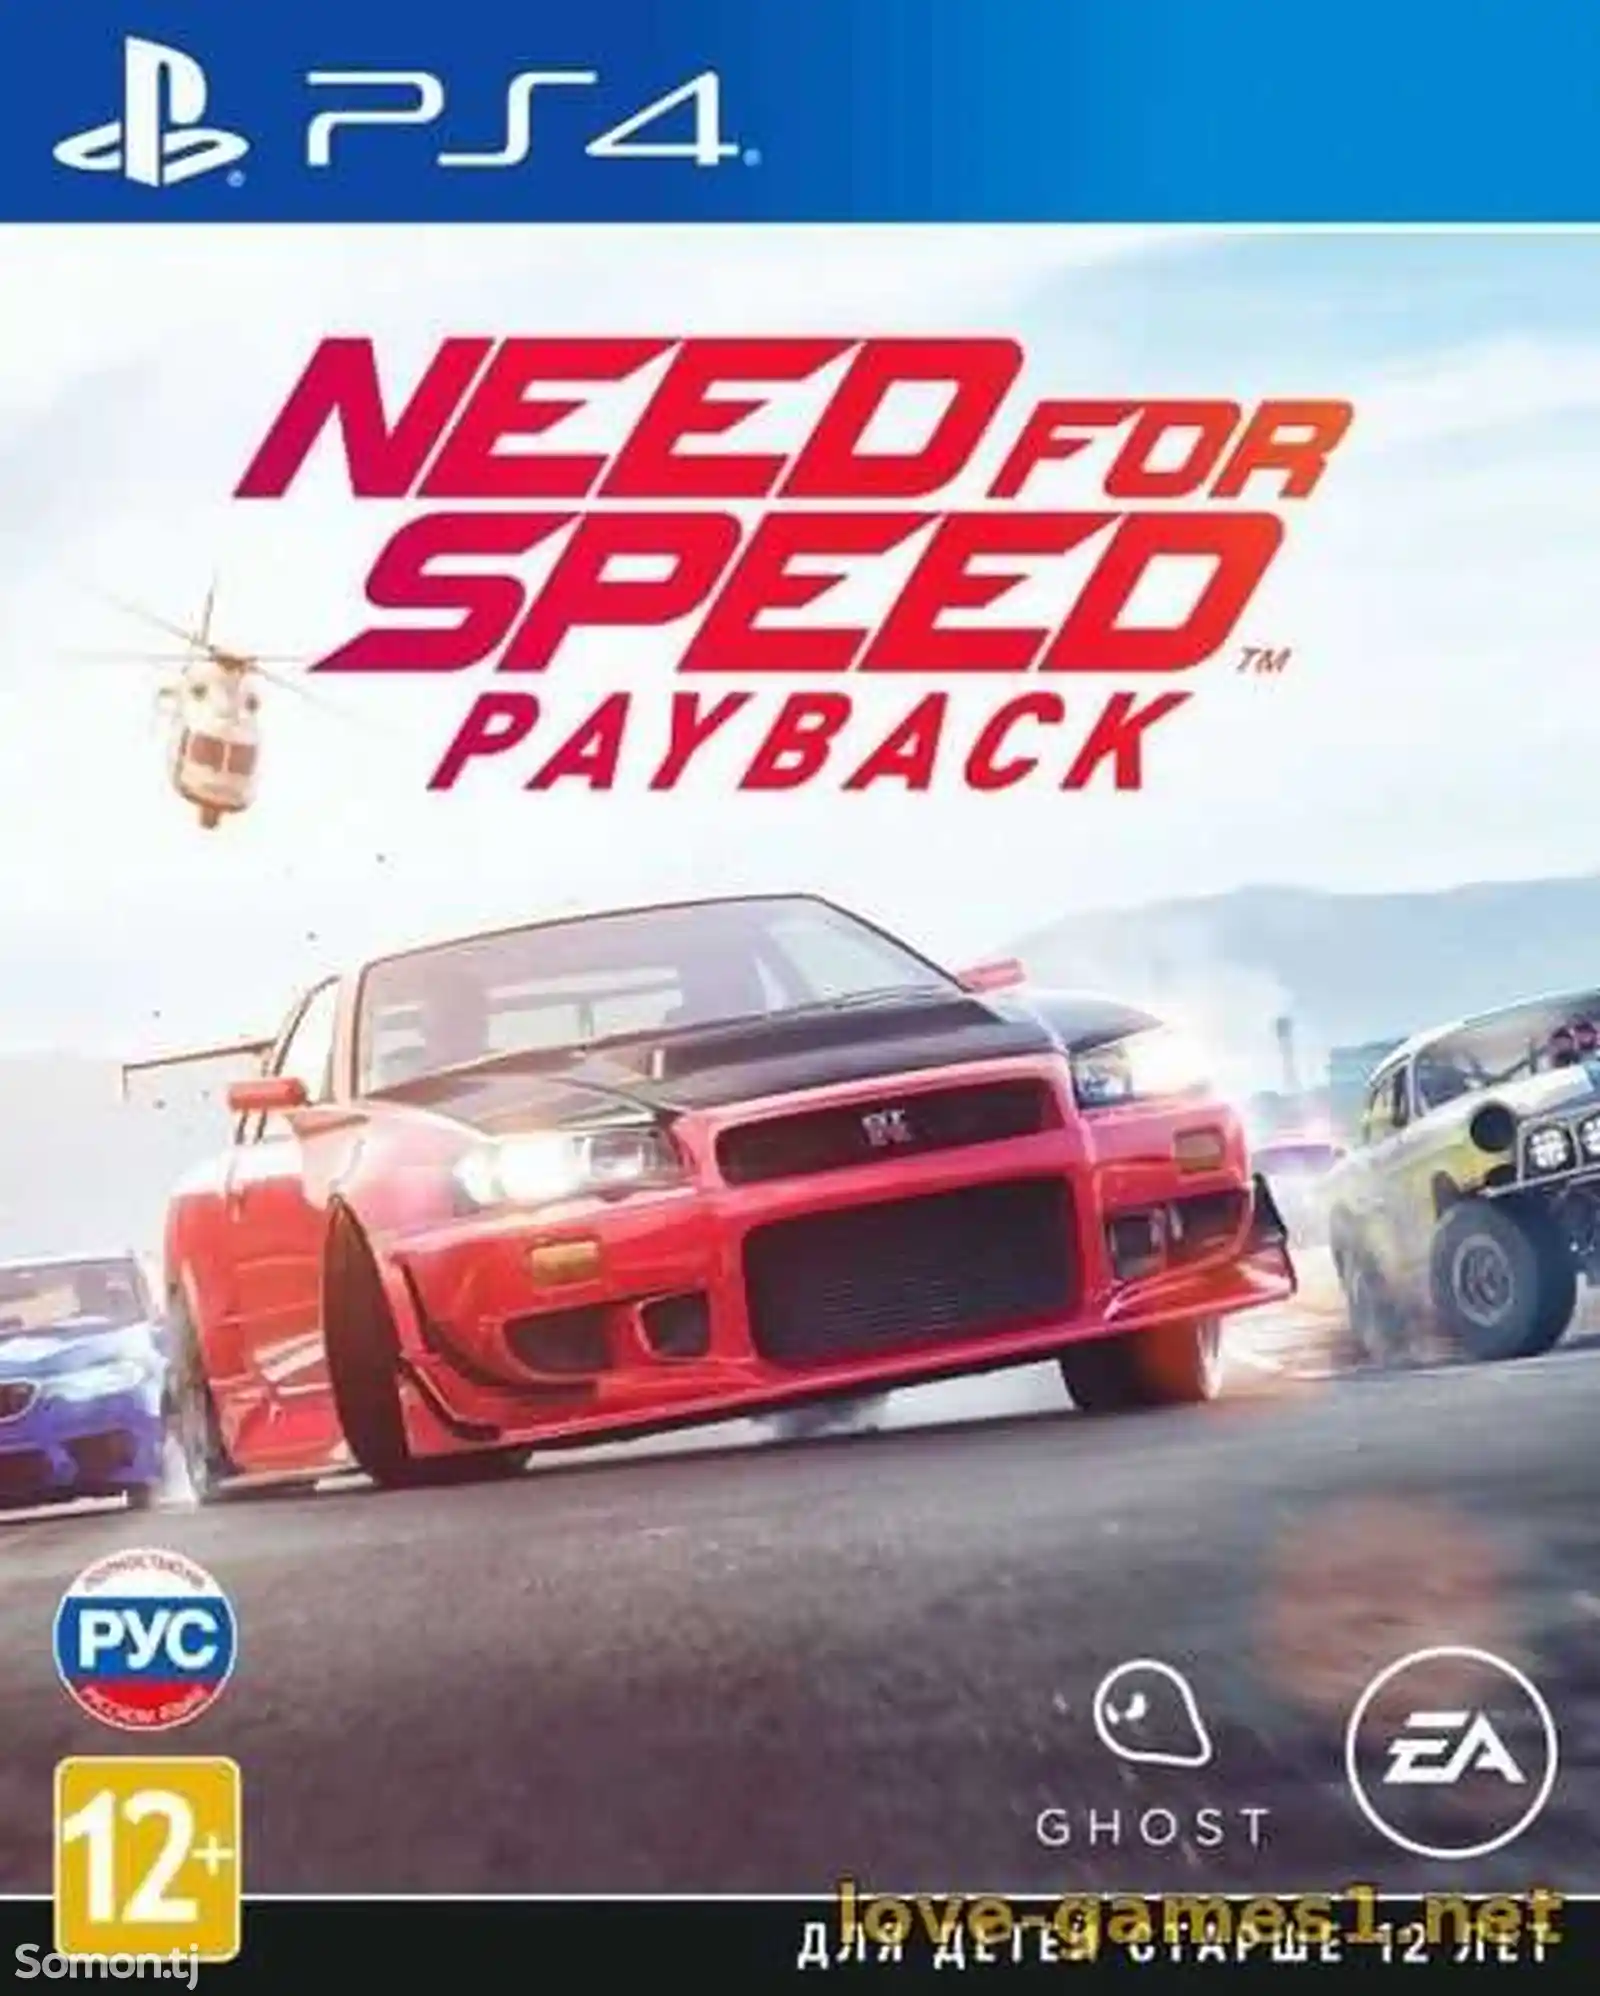 Игра Need for Speed Payback Deluxe Edition v1.10 для Ps4-1